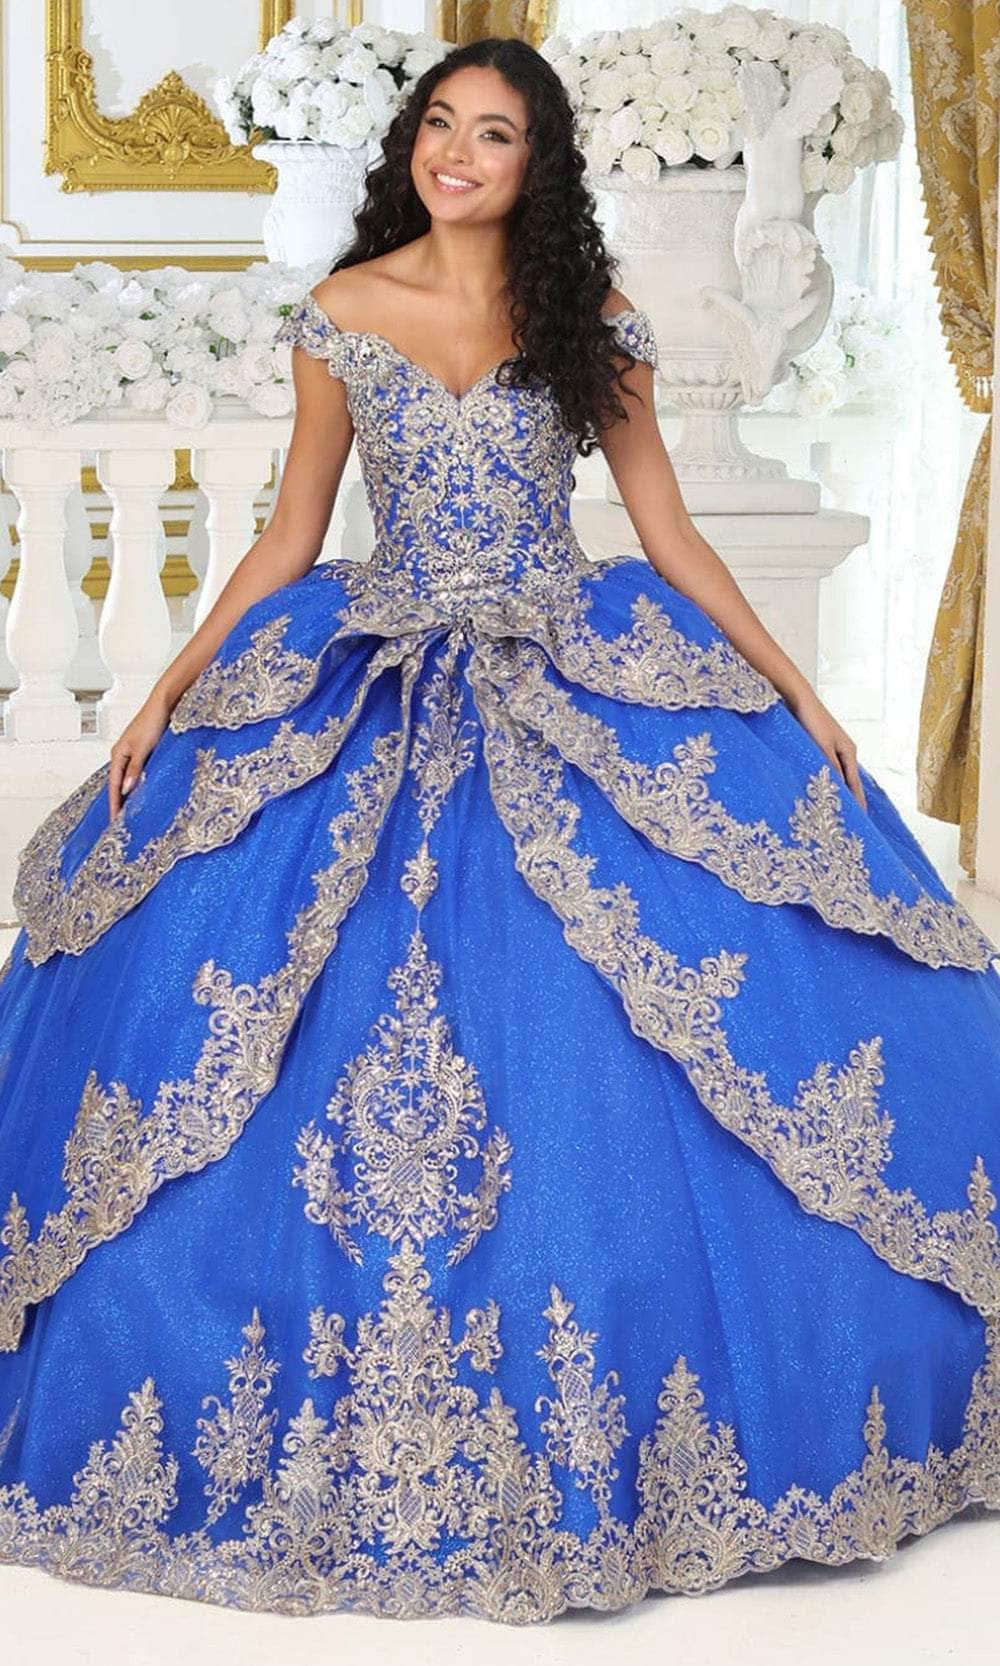 May Queen LK234 - Off Shoulder Tiered Ballgown Quinceanera Dresses 4 / Royal/Gold